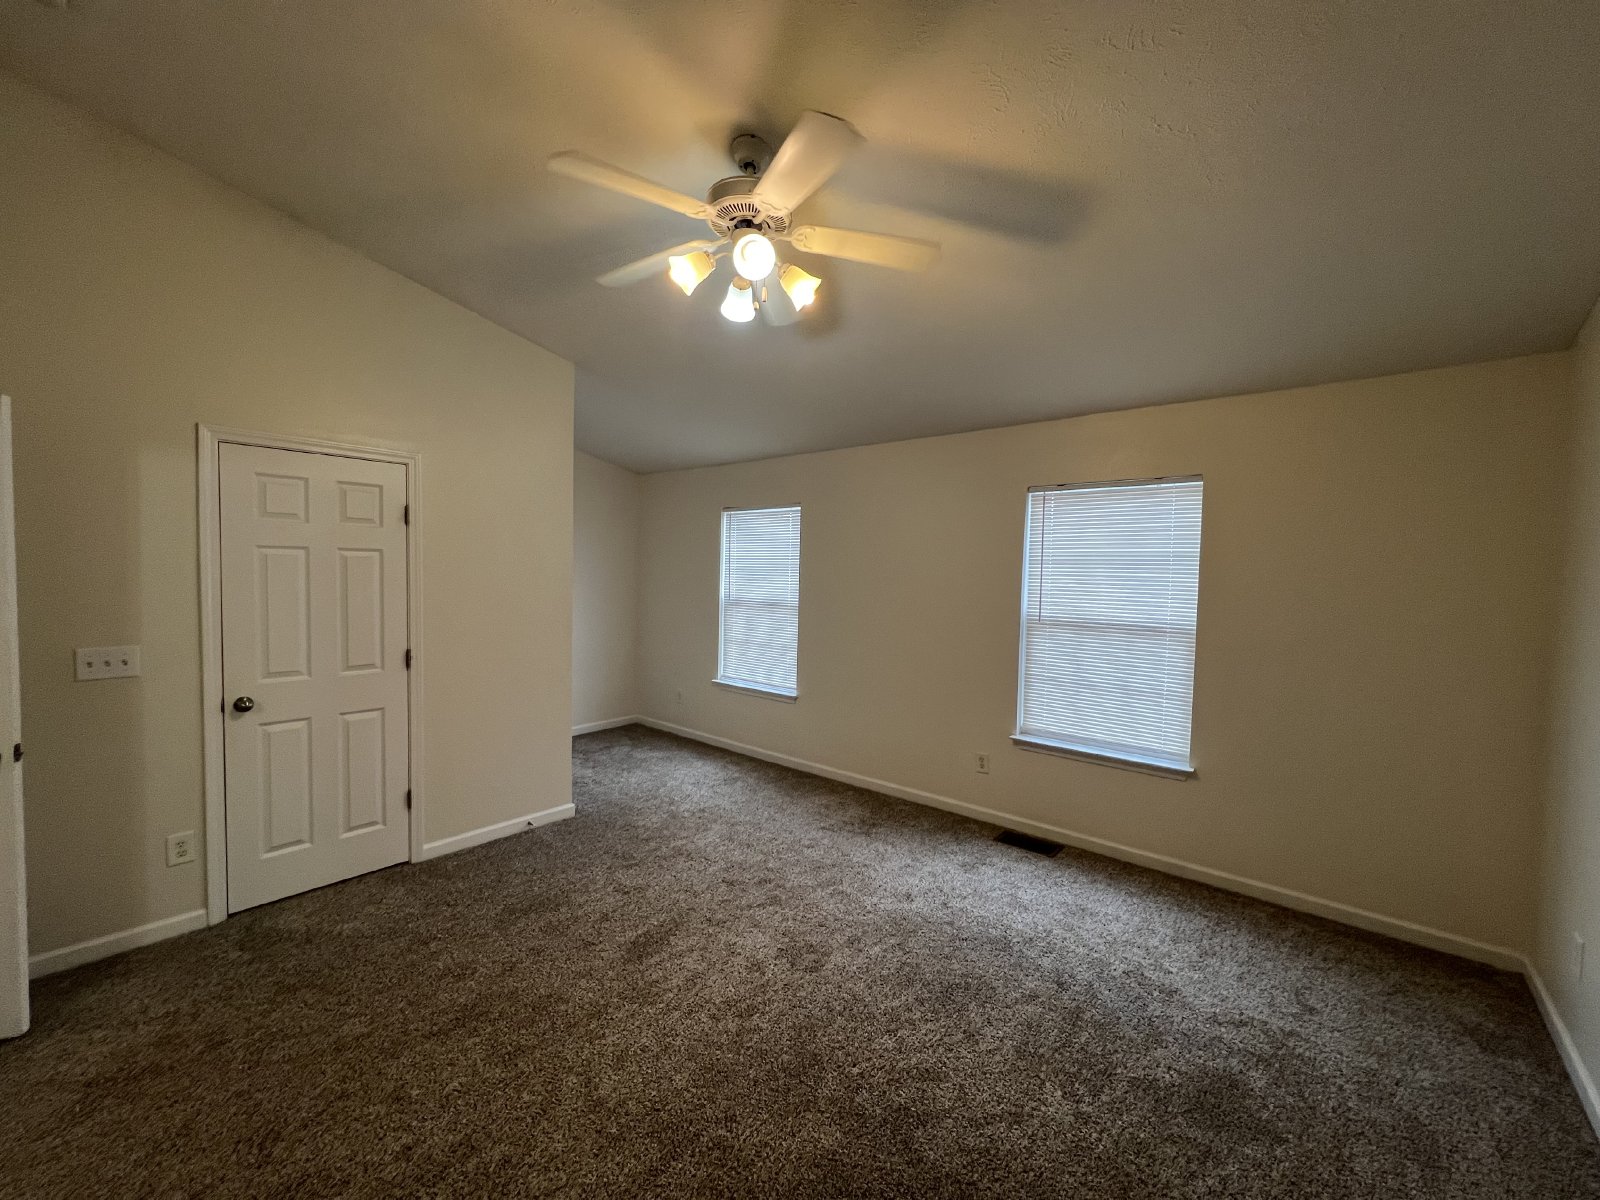 2 Bedroom 2.5 Bath Townhome in Lavergne - Available Now property image